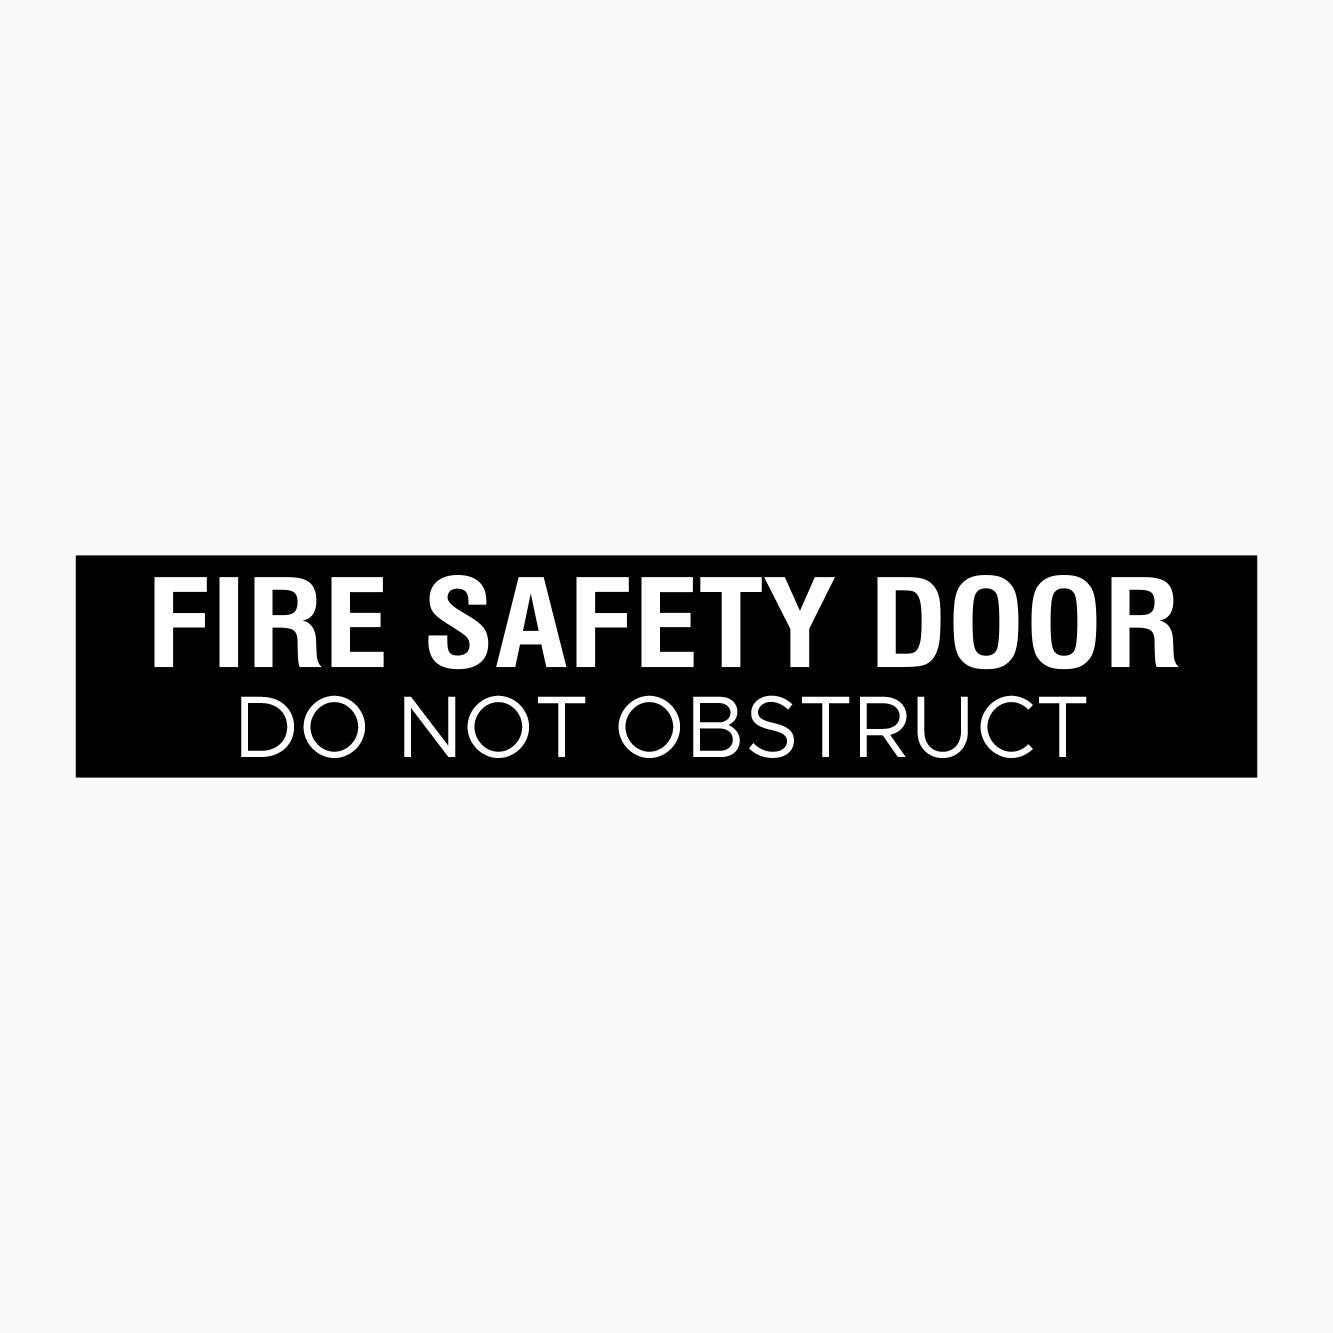 FIRE SAFETY DOOR SIGN - DO NOT OBSTRUCT SIGN